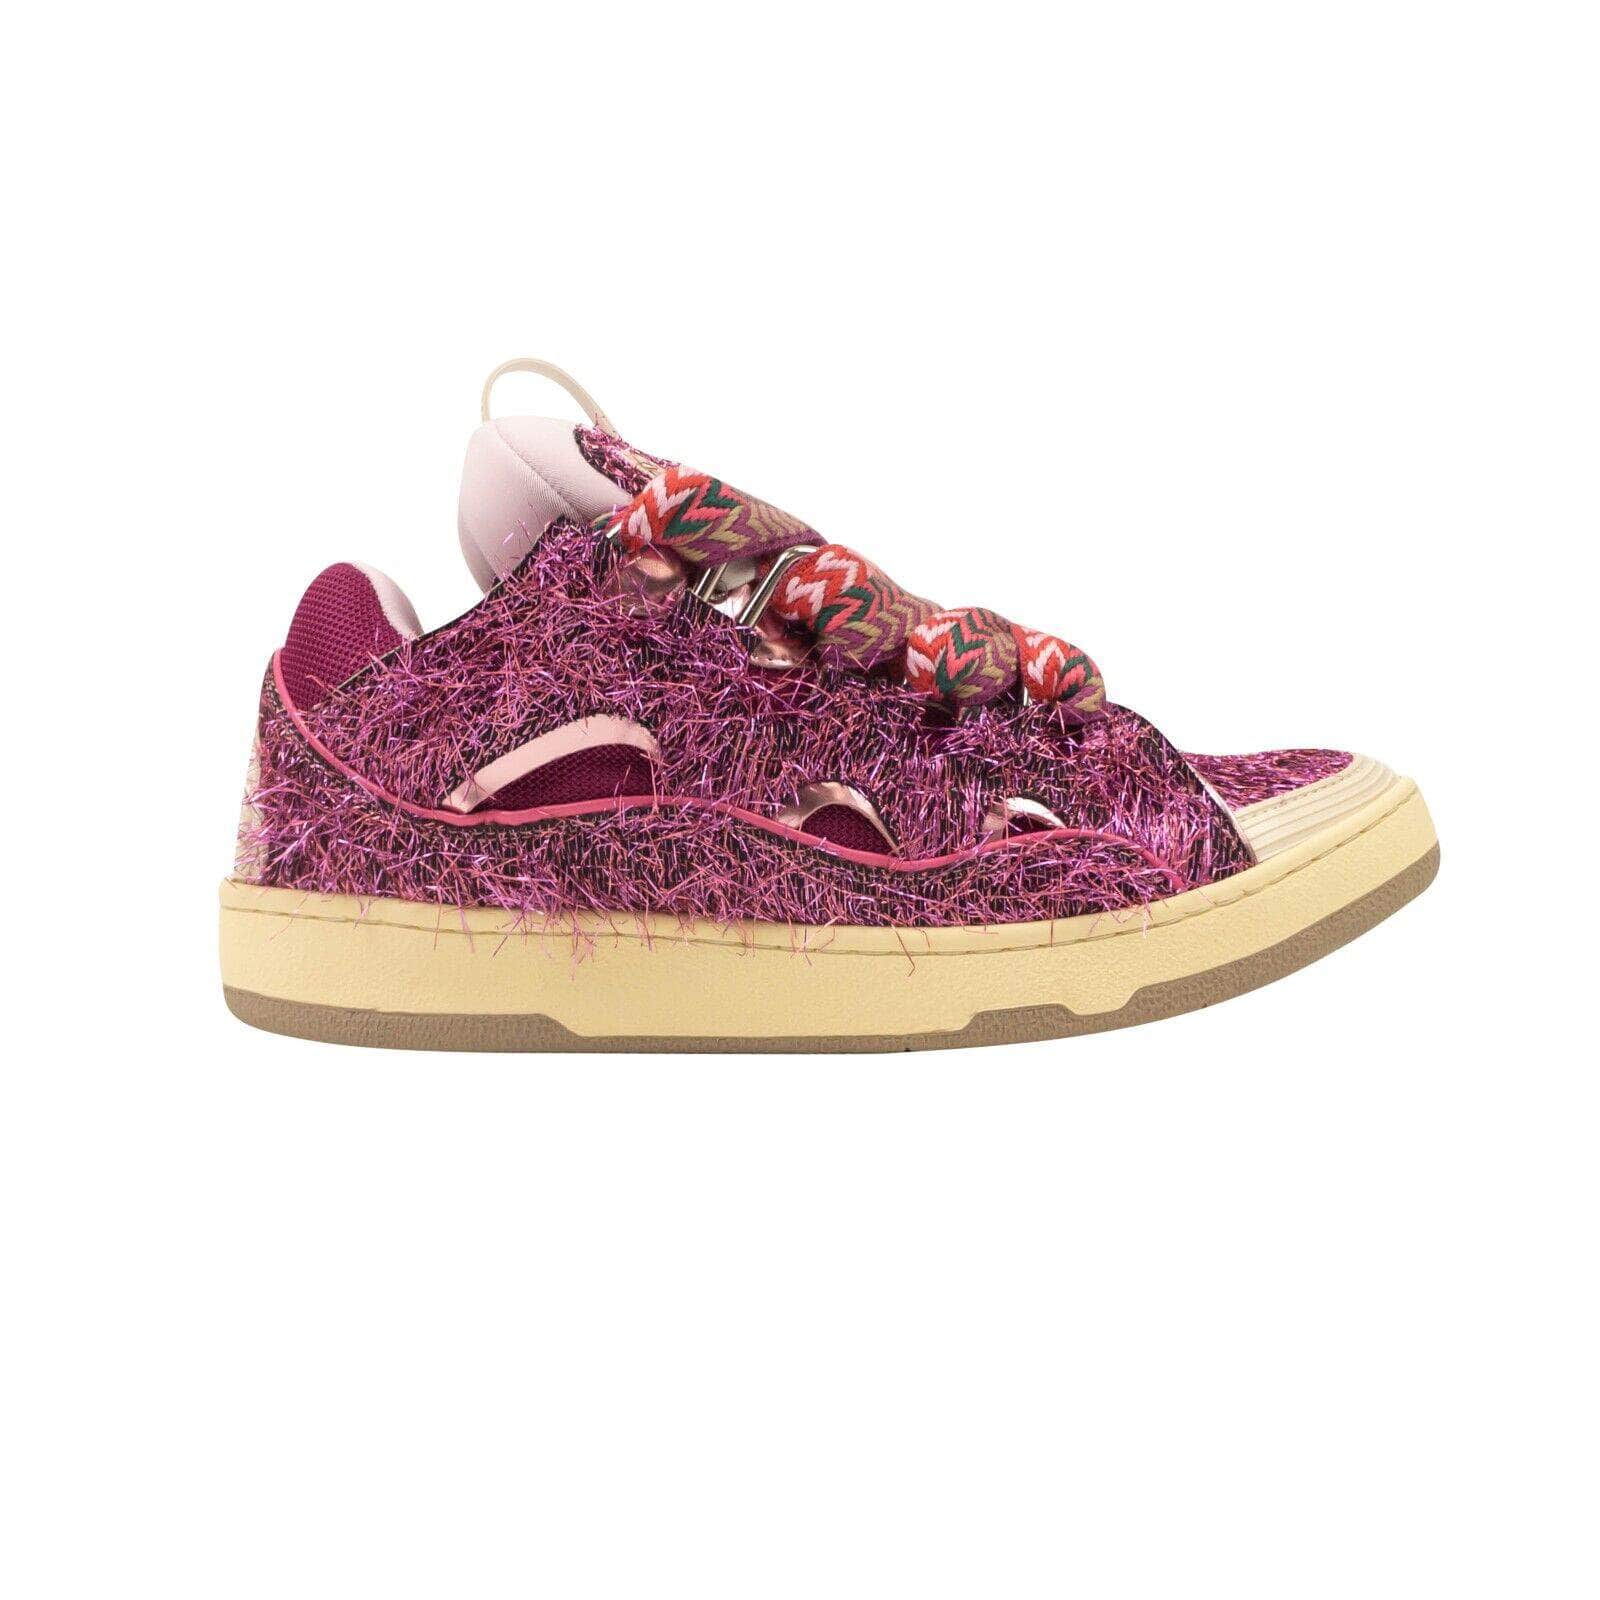 Lanvin 1000-2000, channelenable-all, chicmi, couponcollection, gender-mens, main-shoes, mens-shoes, size-43, size-44, size-45, size-46 Pink Low Top Curb Lace Up Sneakers